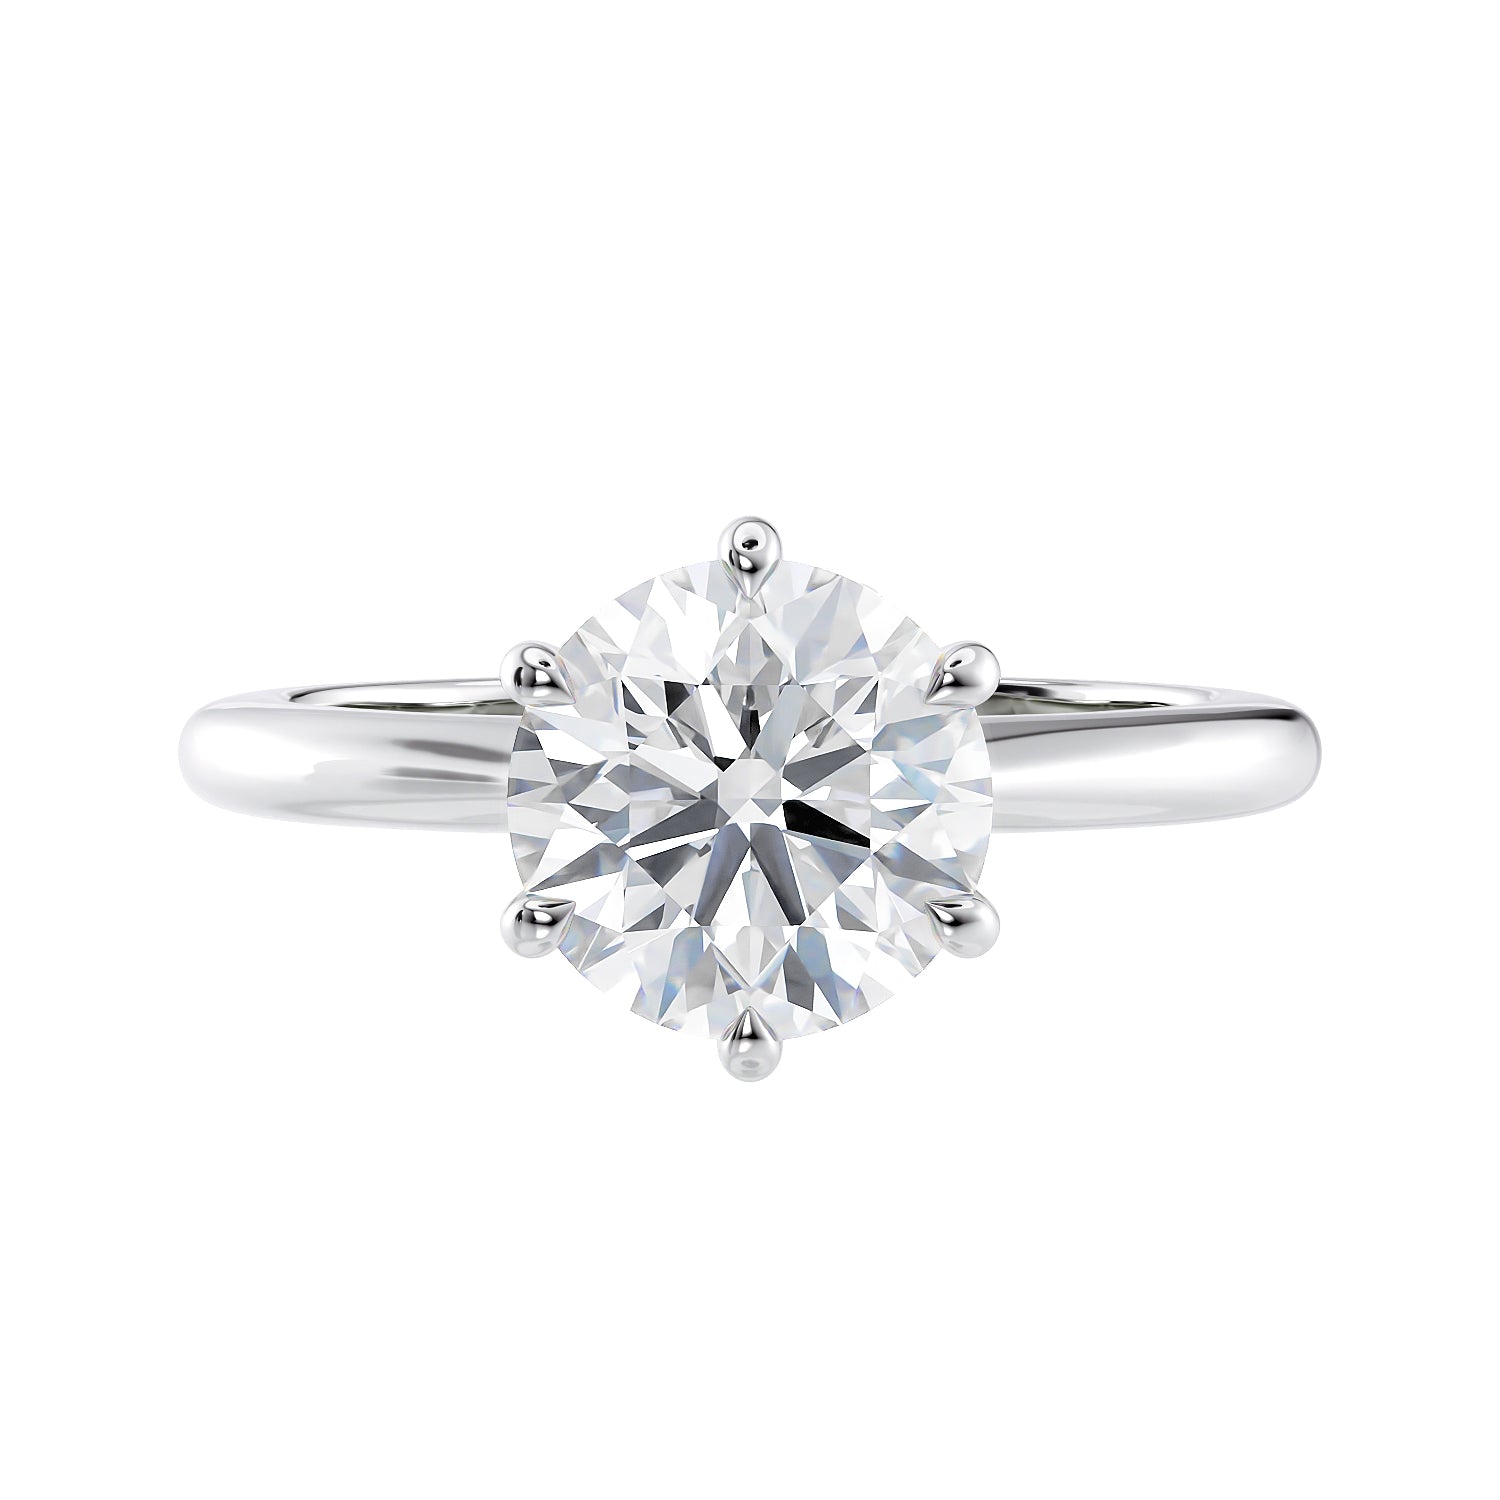 6 claw solitaire lab grown diamond engagement ring white gold front view.